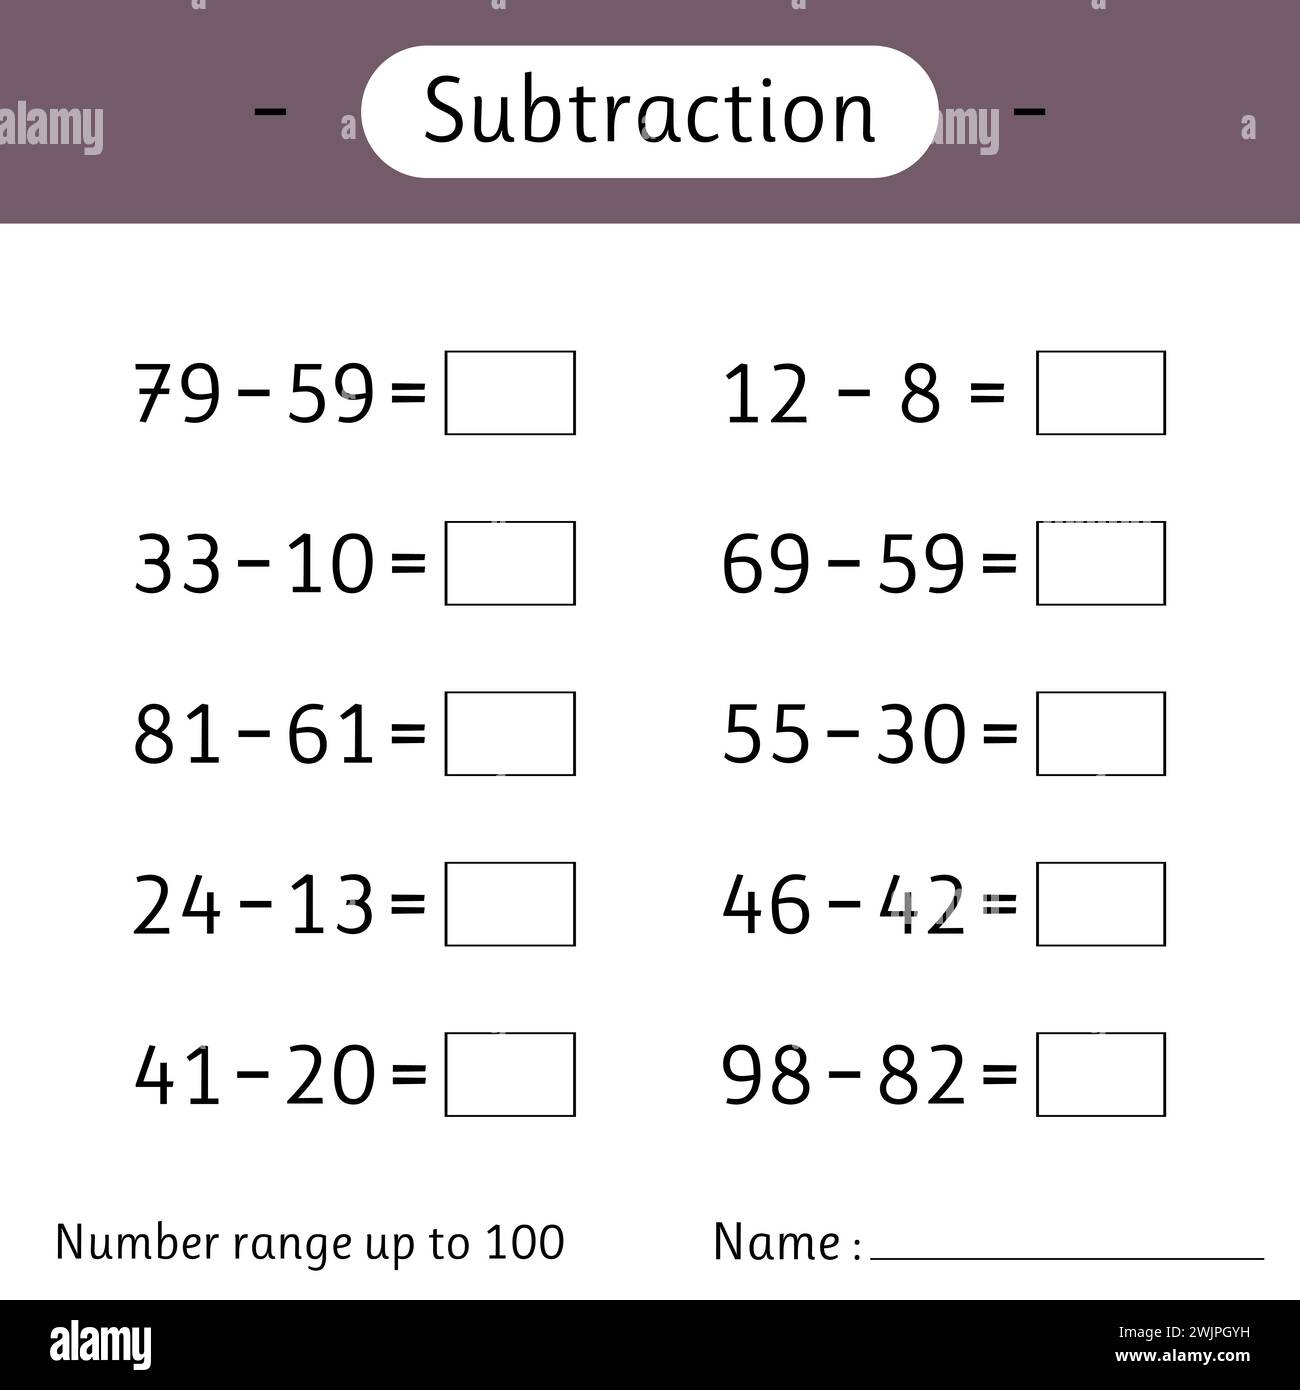 Subtraction. Number range up to 100. Mathematics. Math worksheet for kids. Solve examples and write. Developing numeracy skills. Vector illustration Stock Vector